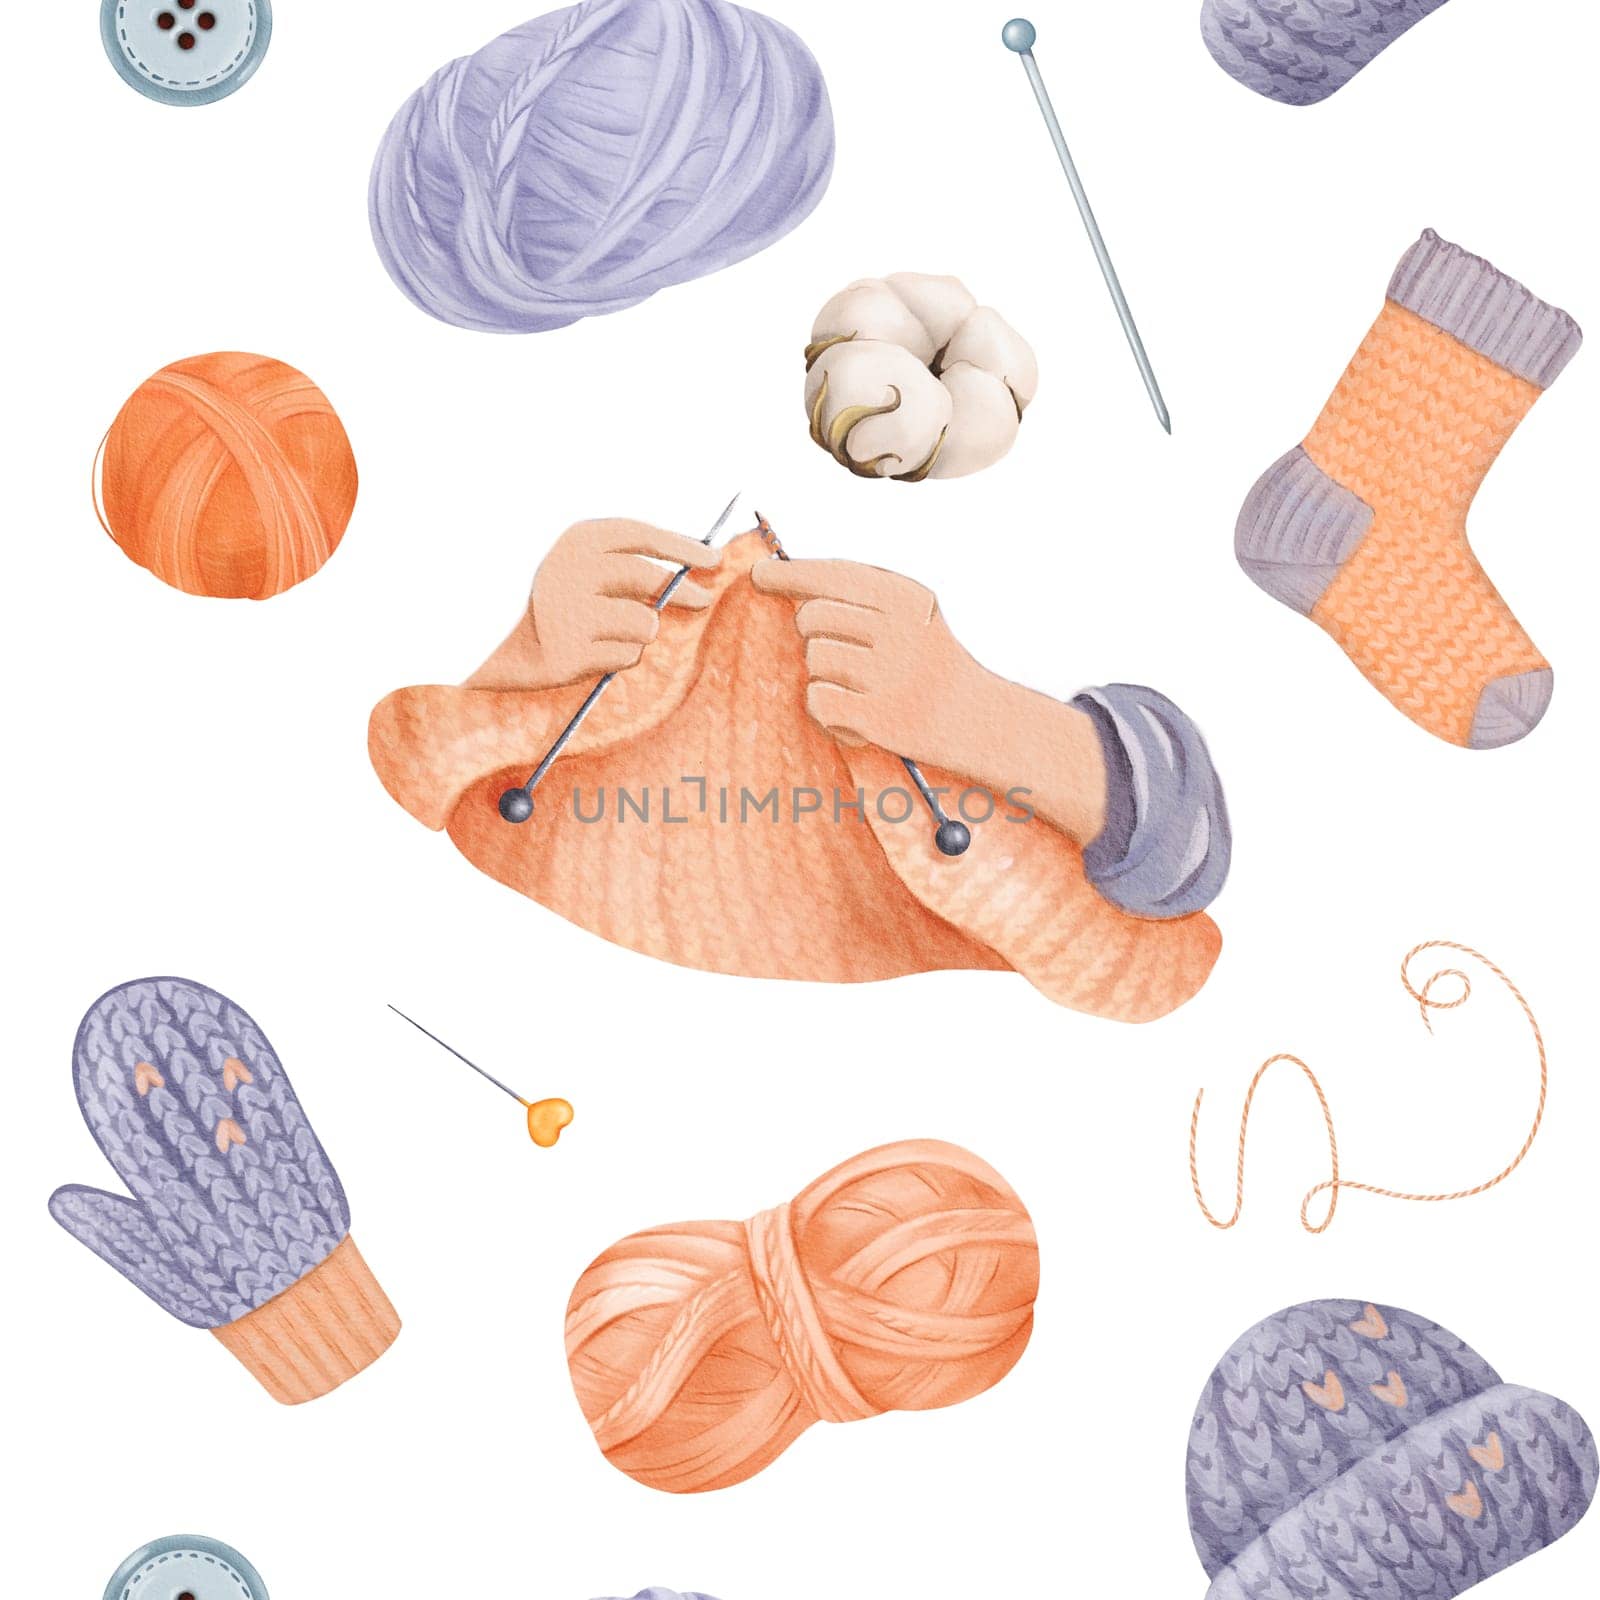 A seamless pattern celebrating knitting, hands crafting fabric and various knitted garments like hats socks and mittens. yarn skeins, buttons and pins with cotton flowers. watercolor.